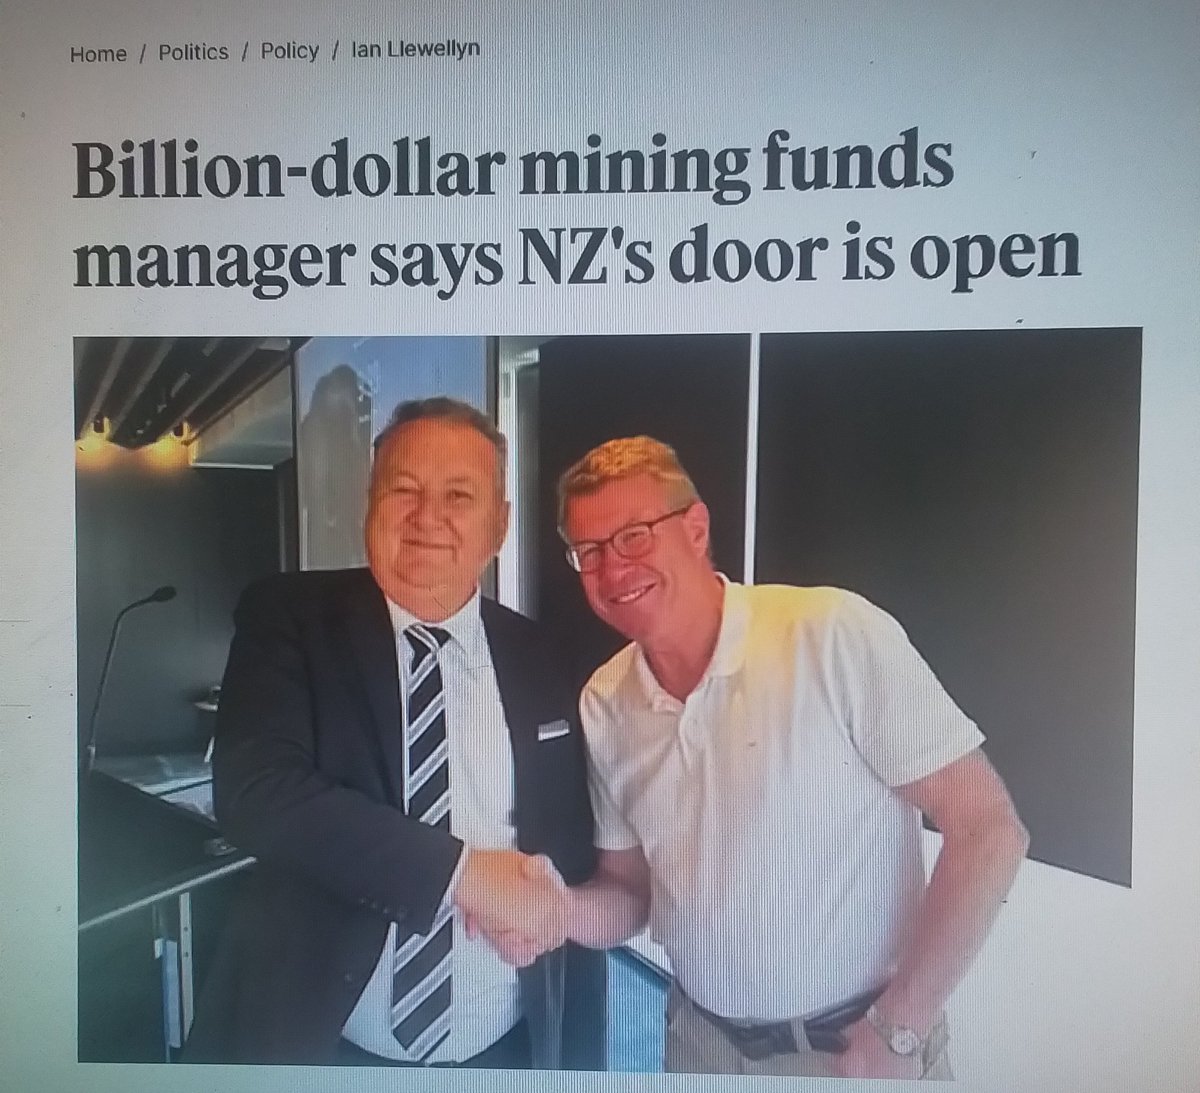 Will help what? Nobody is buying coal not even Fonterra once milk drying rooms converted. We have  Paris Agreement targets Willis has to find money for. National
 Gov signed it. The real economy is a regenerative economy not this backward policy promoted by Aus mine interests.